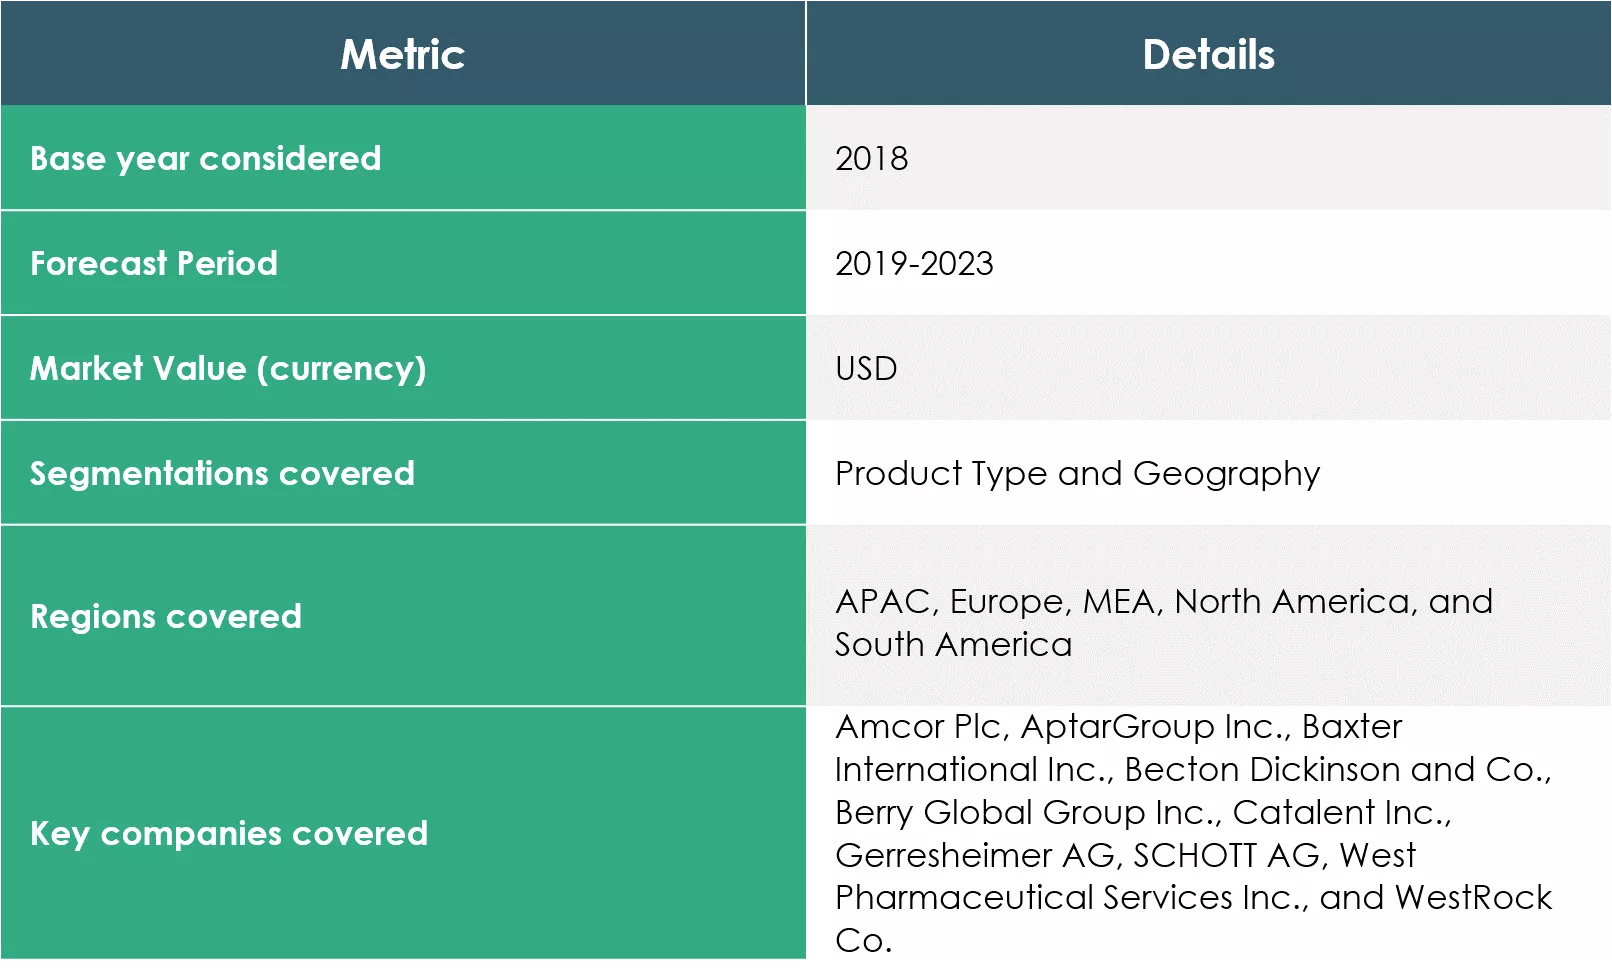 Parenteral-Products-Packaging-Market-Report-Scope